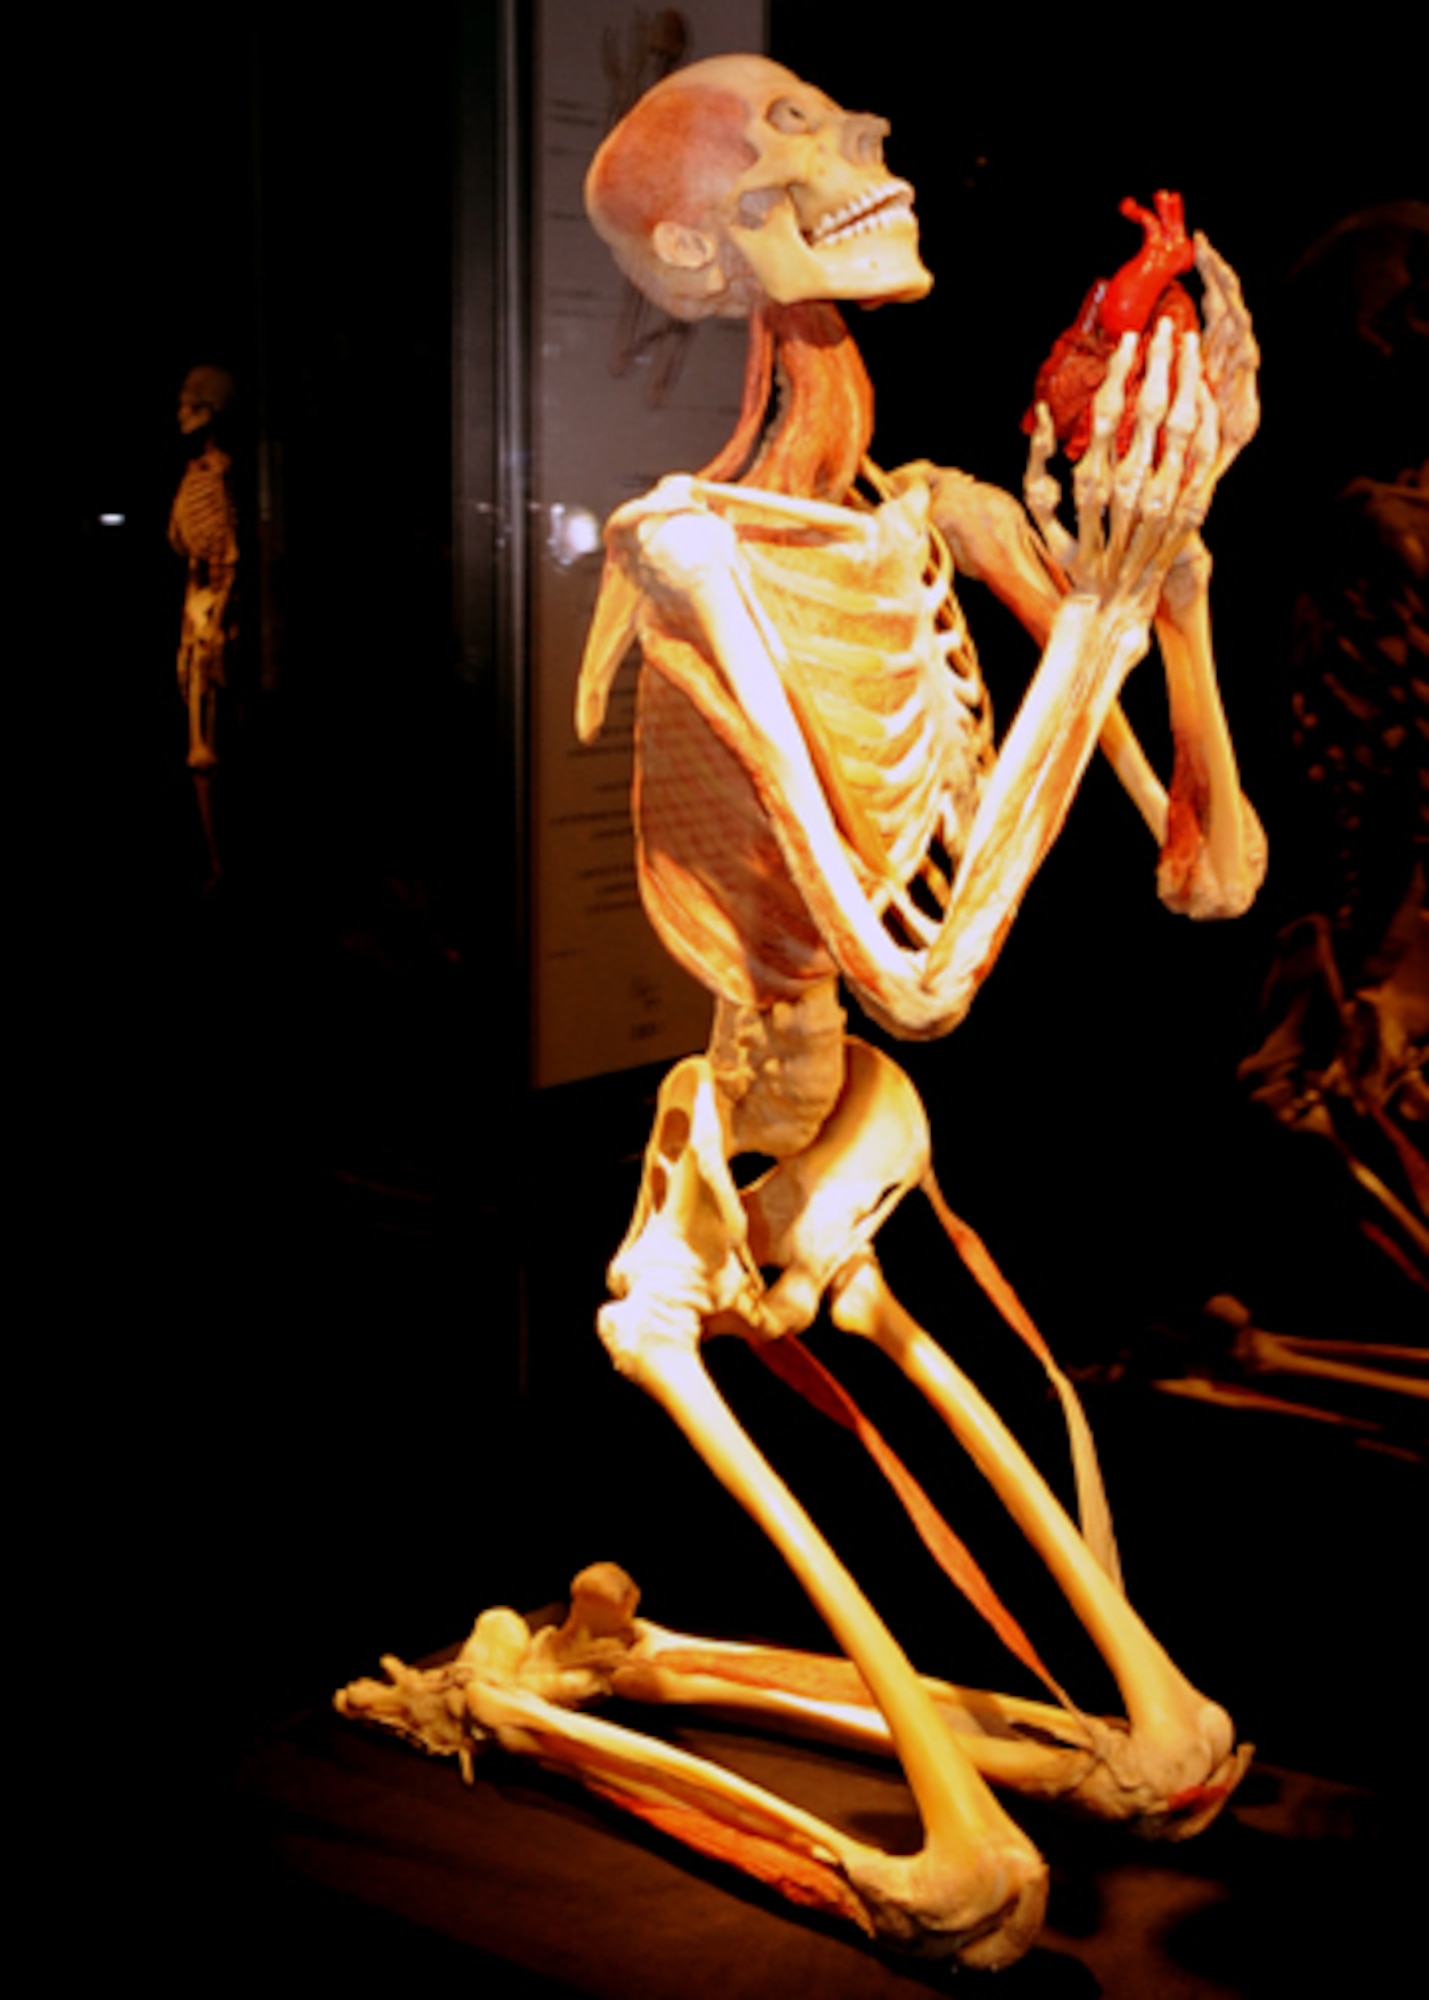 DENVER, Colo. -- The Praying Skeleton is presented as a memorial to the body donors at the Body Worlds and the Story of the Hearth exhibit. The skeleton praises the vessels of the heart, indicating the fragility of our existance. The heart is the first organ to form and stops working last. (U.S. Air Force photo by Airman 1st Class Marcy Glass)